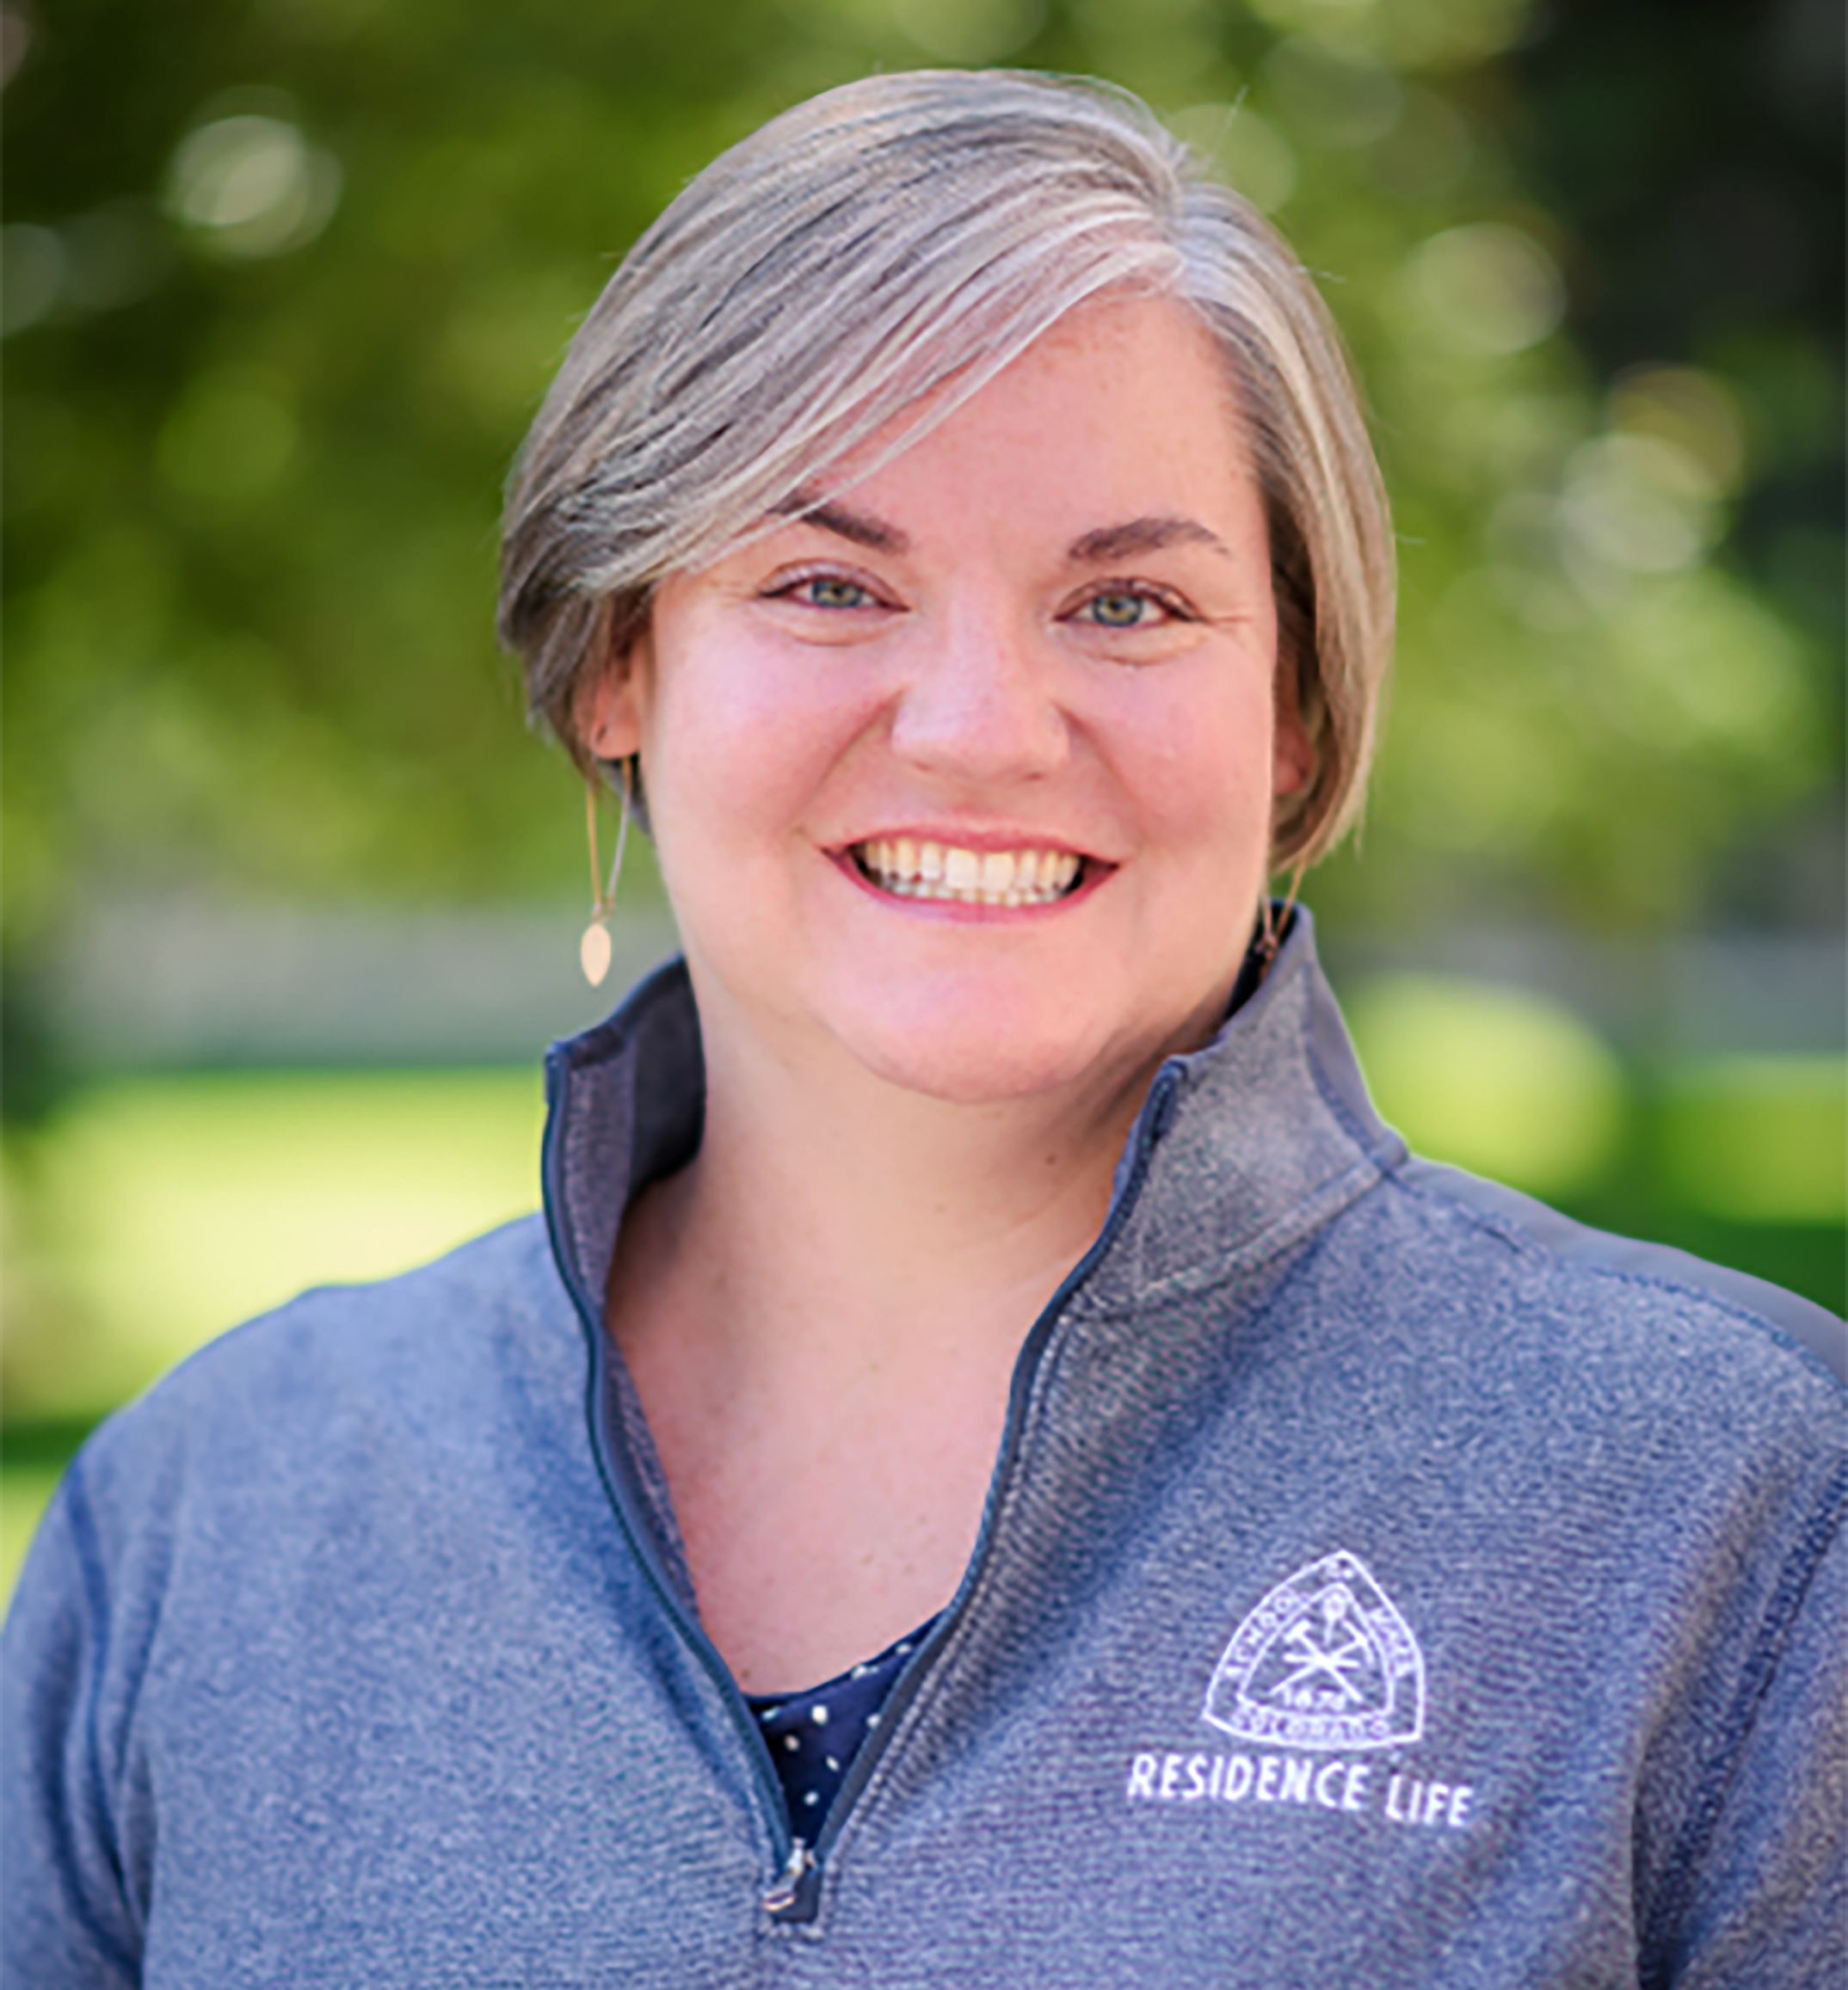 Mary Elliott, Director of Residence Life and Housing at Colorado School of Mines